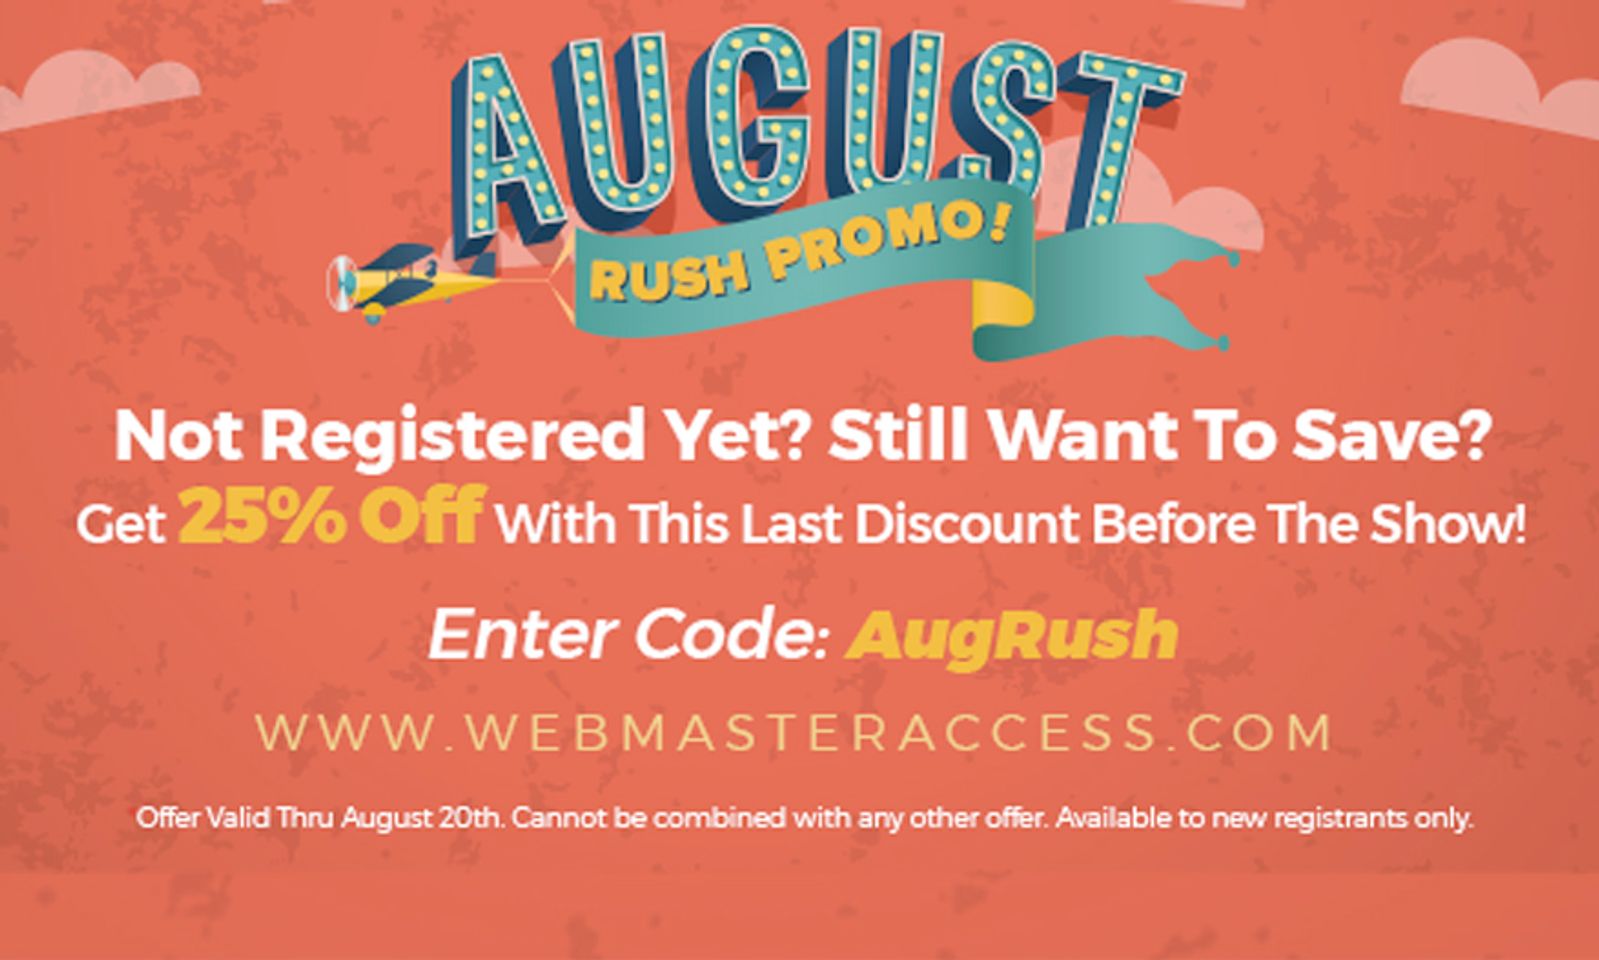 Webmaster Access 2016 Offers 'August Rush' Discount